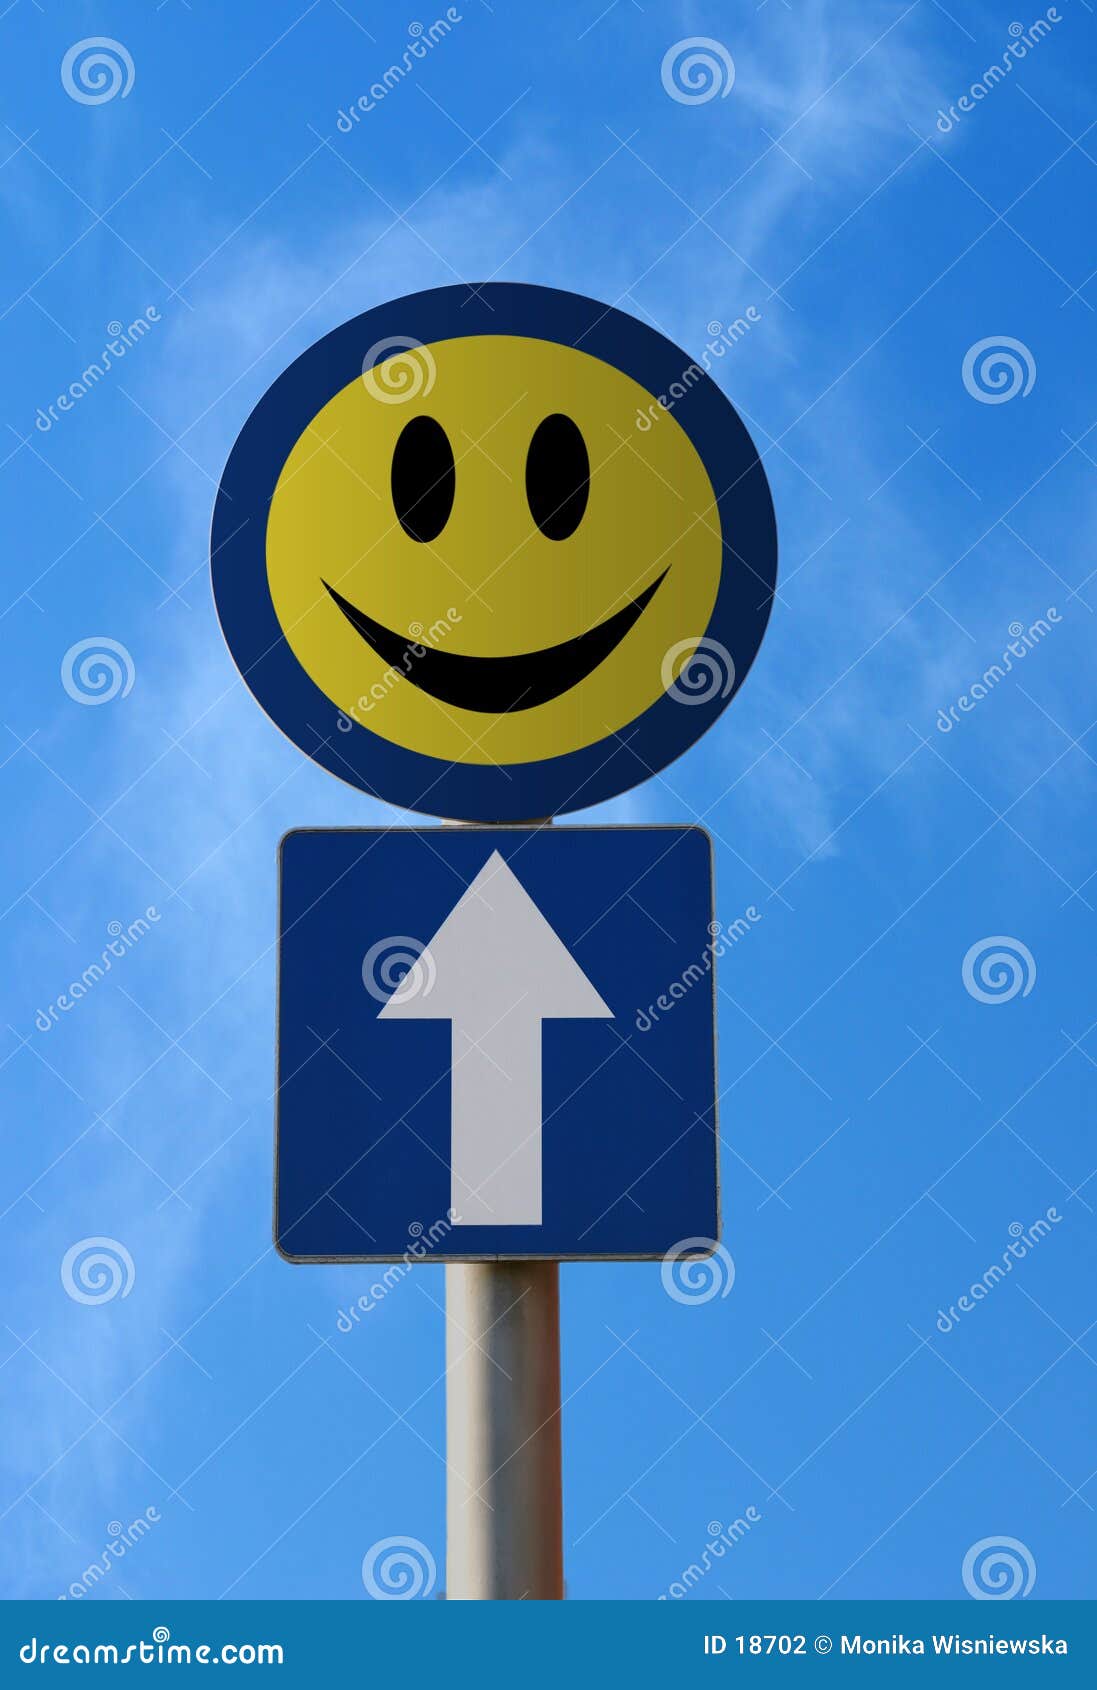 traffic sign - happiness ahead